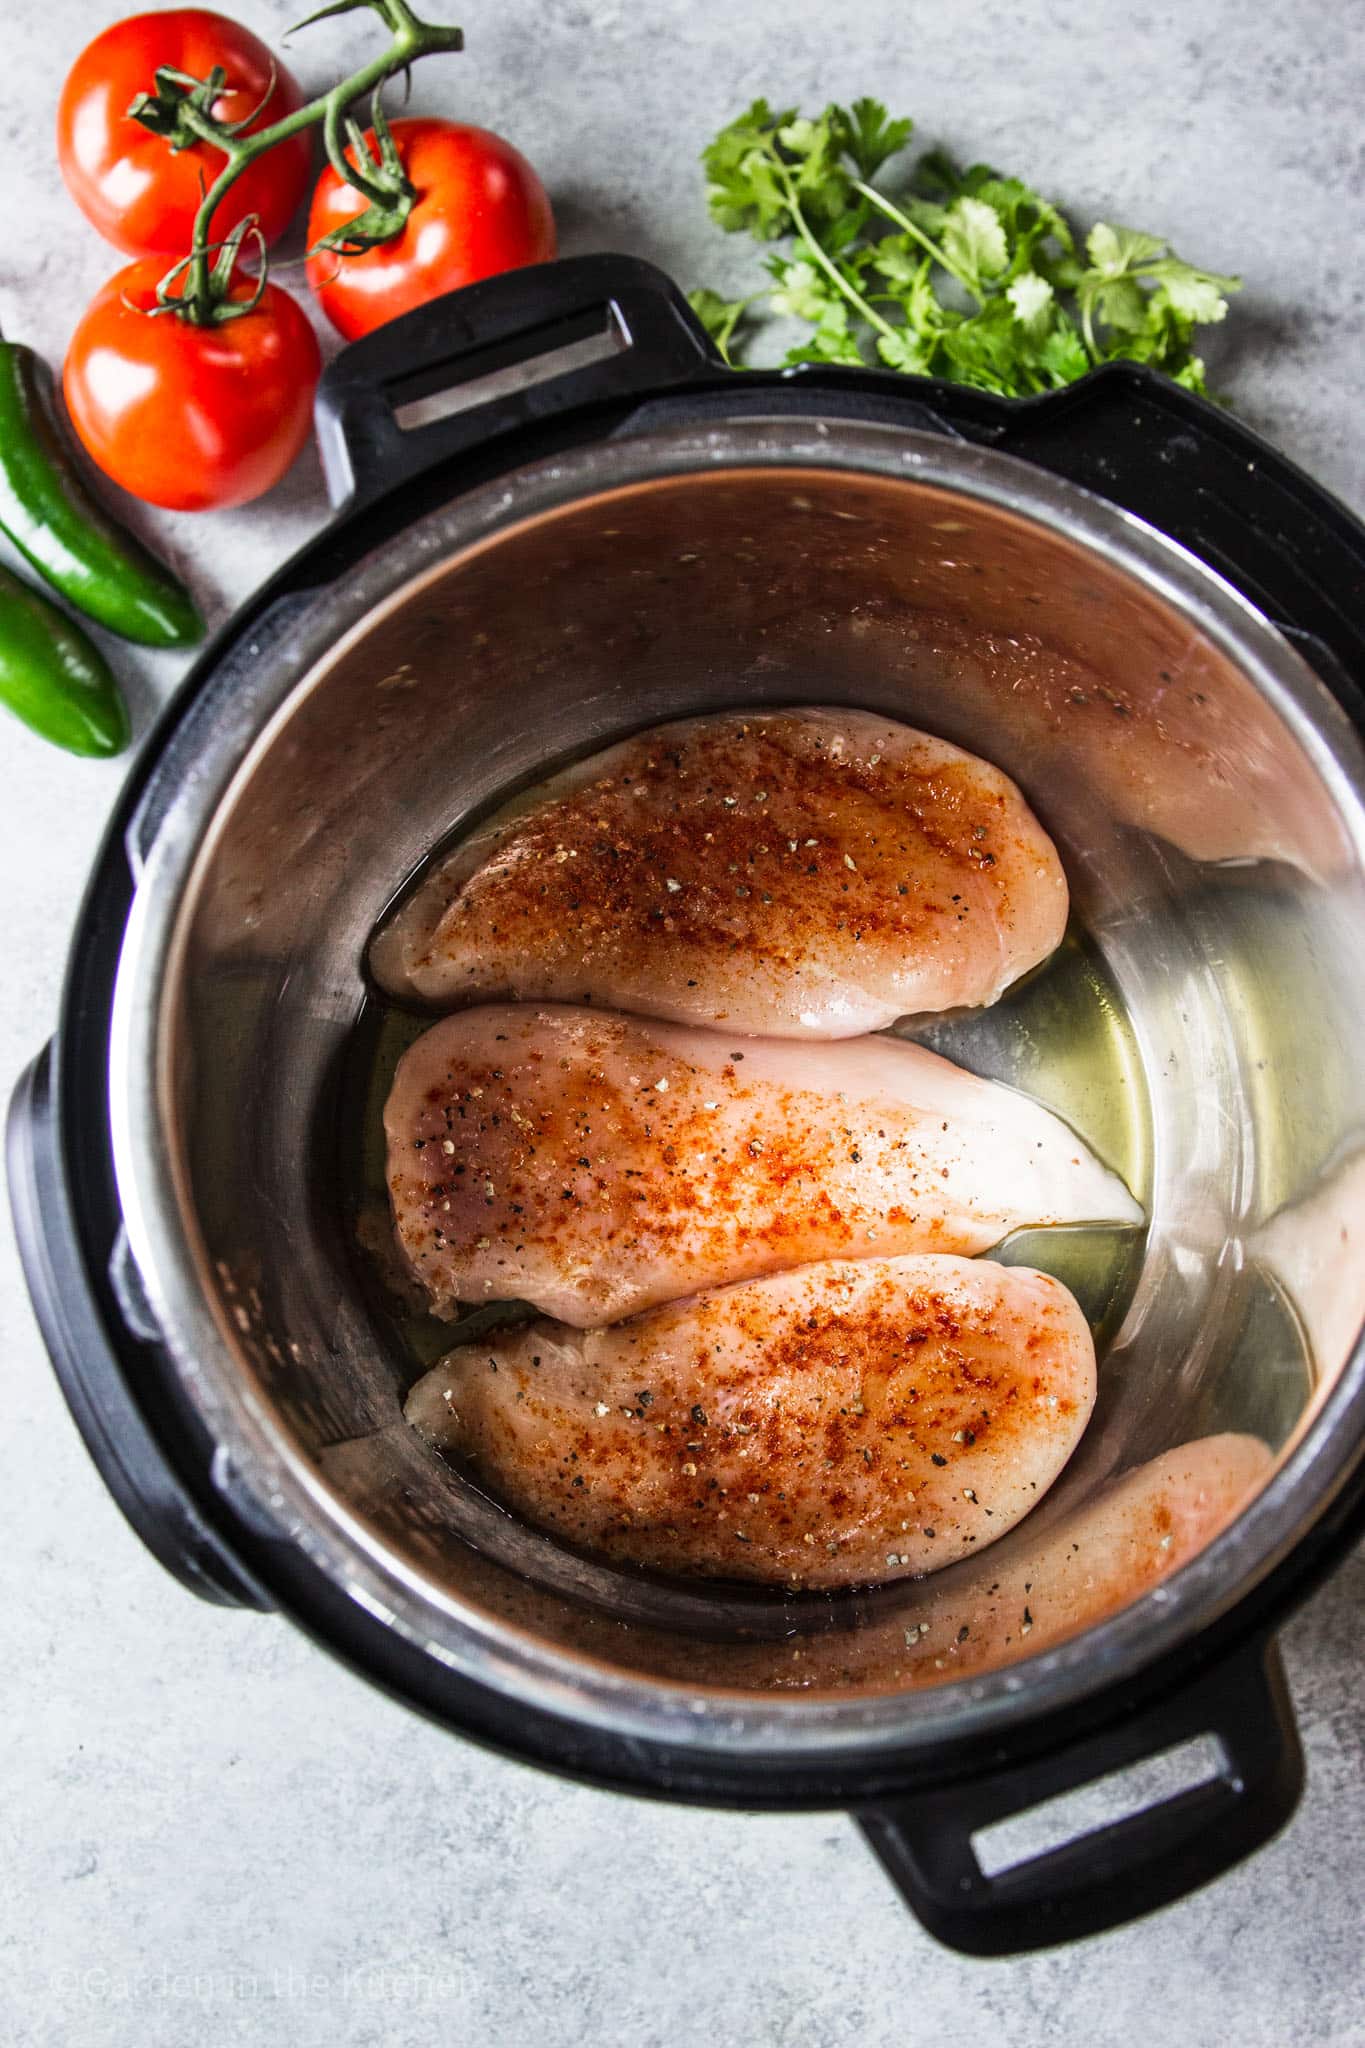 3 raw chicken breasts in an Instant Pot.